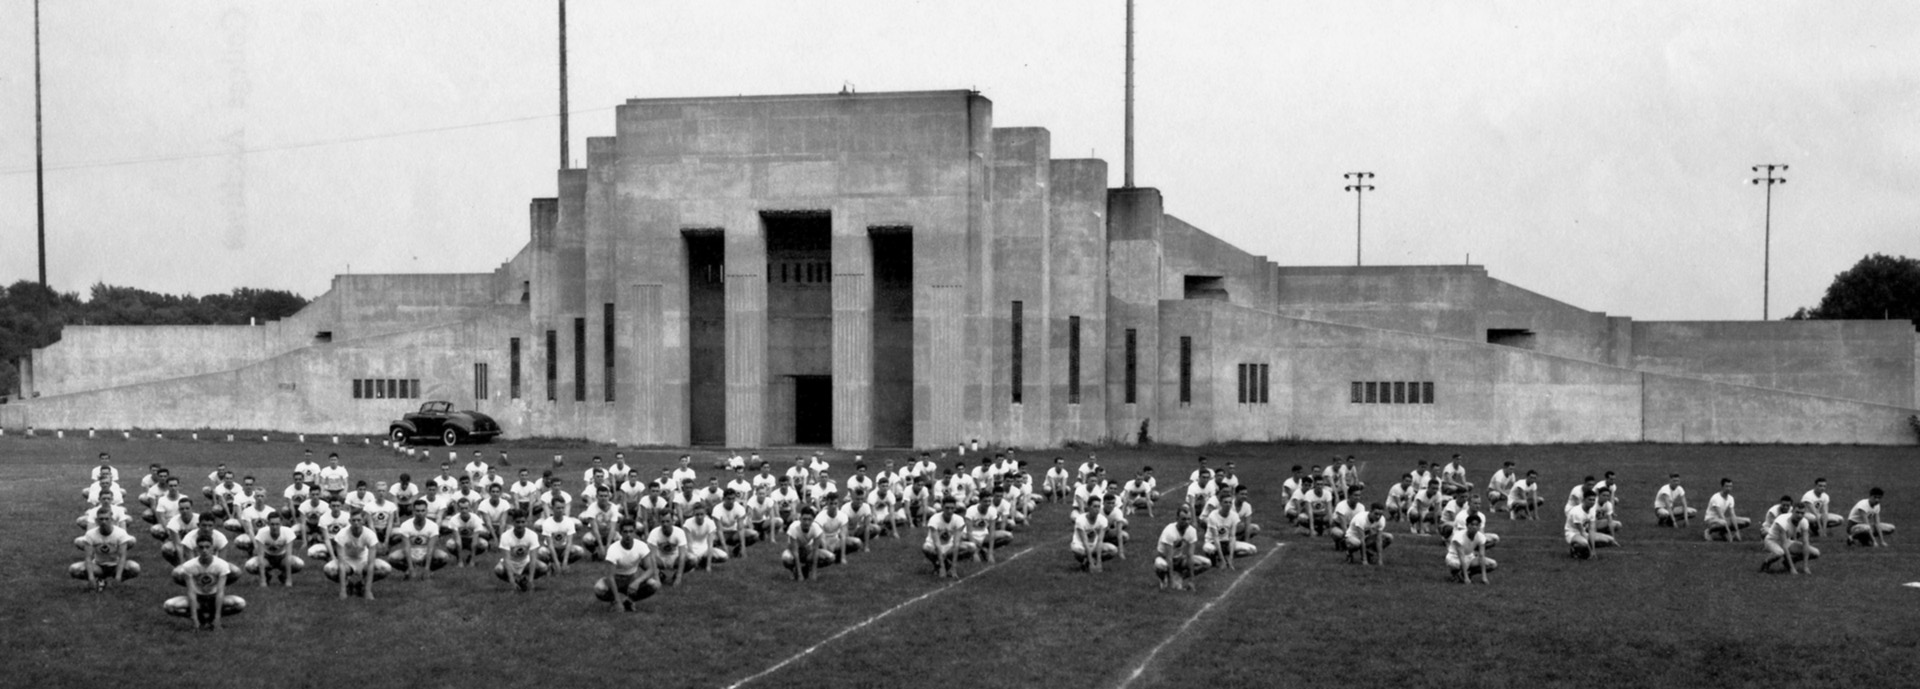 Cadets engage in physical training outside Walter Strong Memorial Stadium, summer 1943. Some 1,100 cadets were enrolled in the program at Beloit during its one year of existence. 